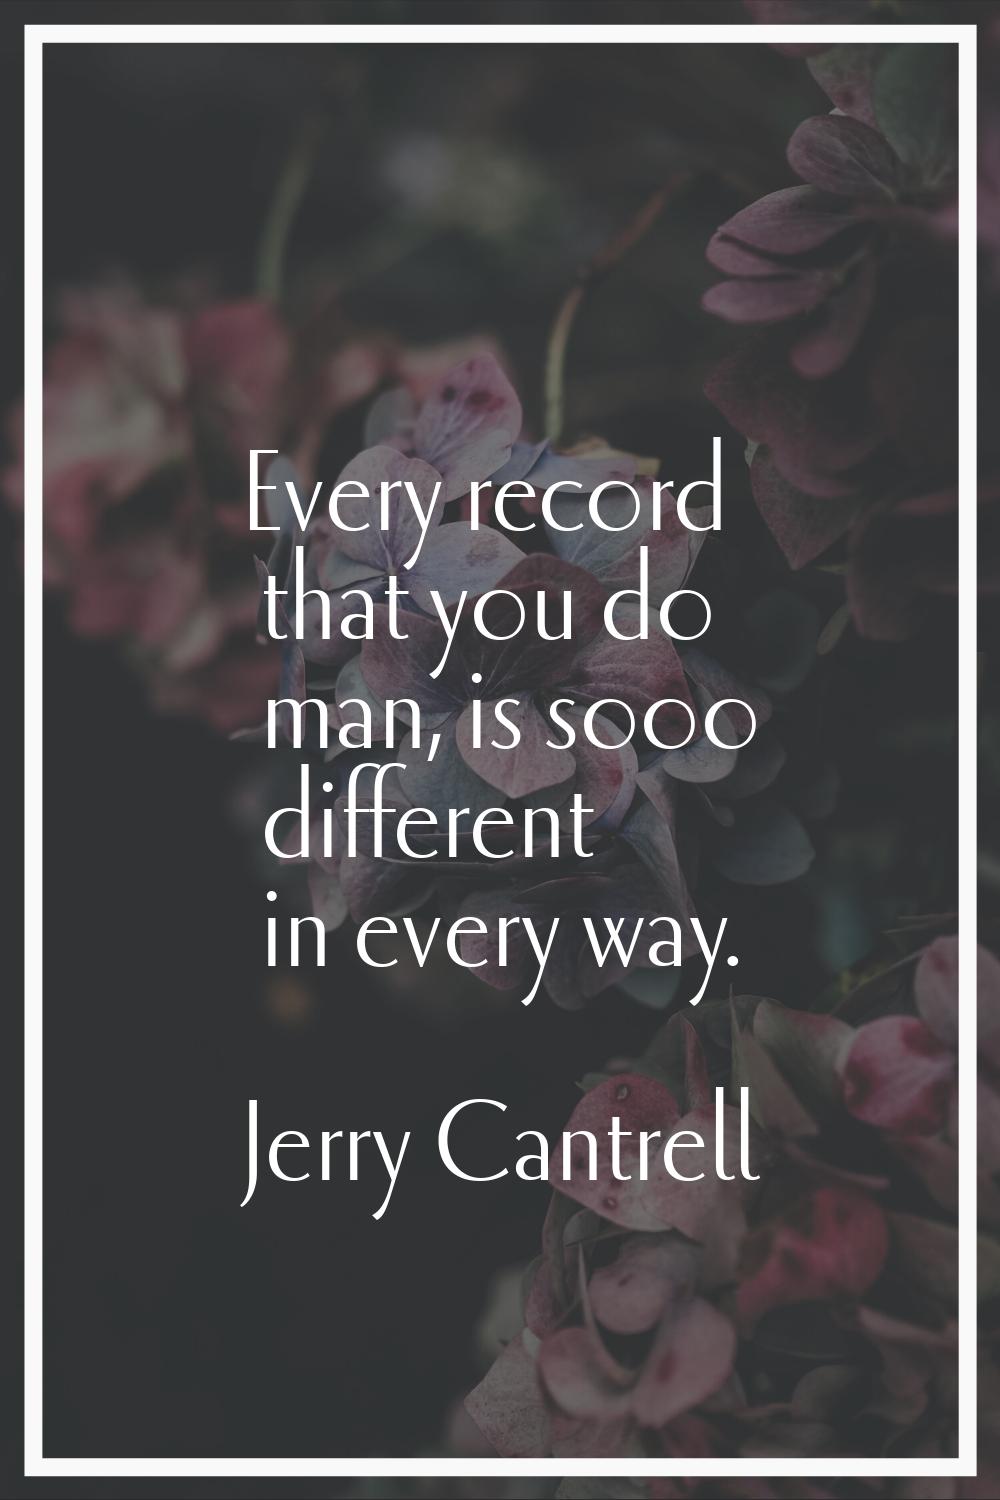 Every record that you do man, is sooo different in every way.